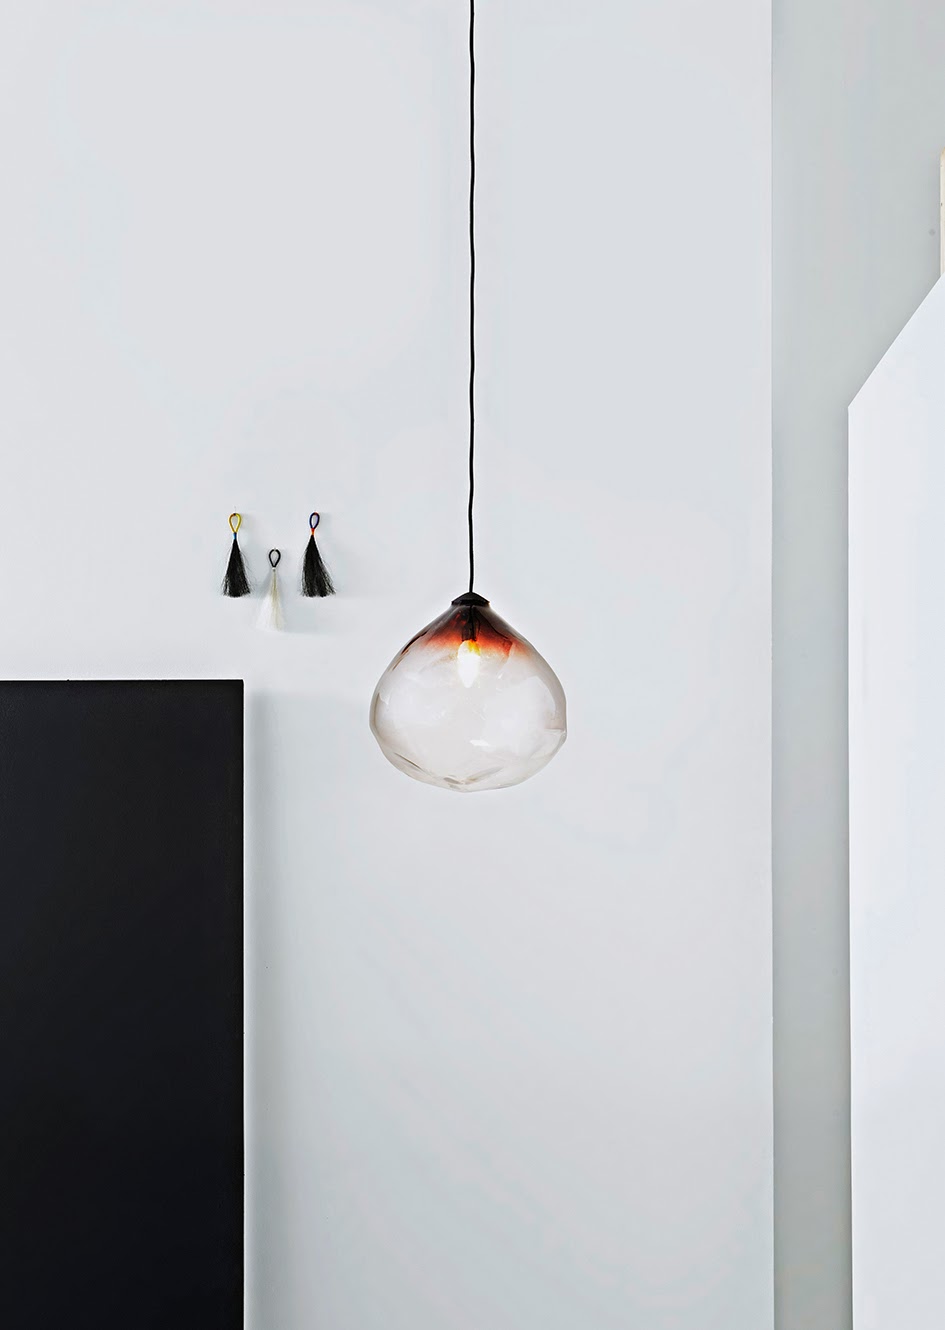 The 'Parison' pendant by Cheshire Architects. Photograph by Toaki Okano. 